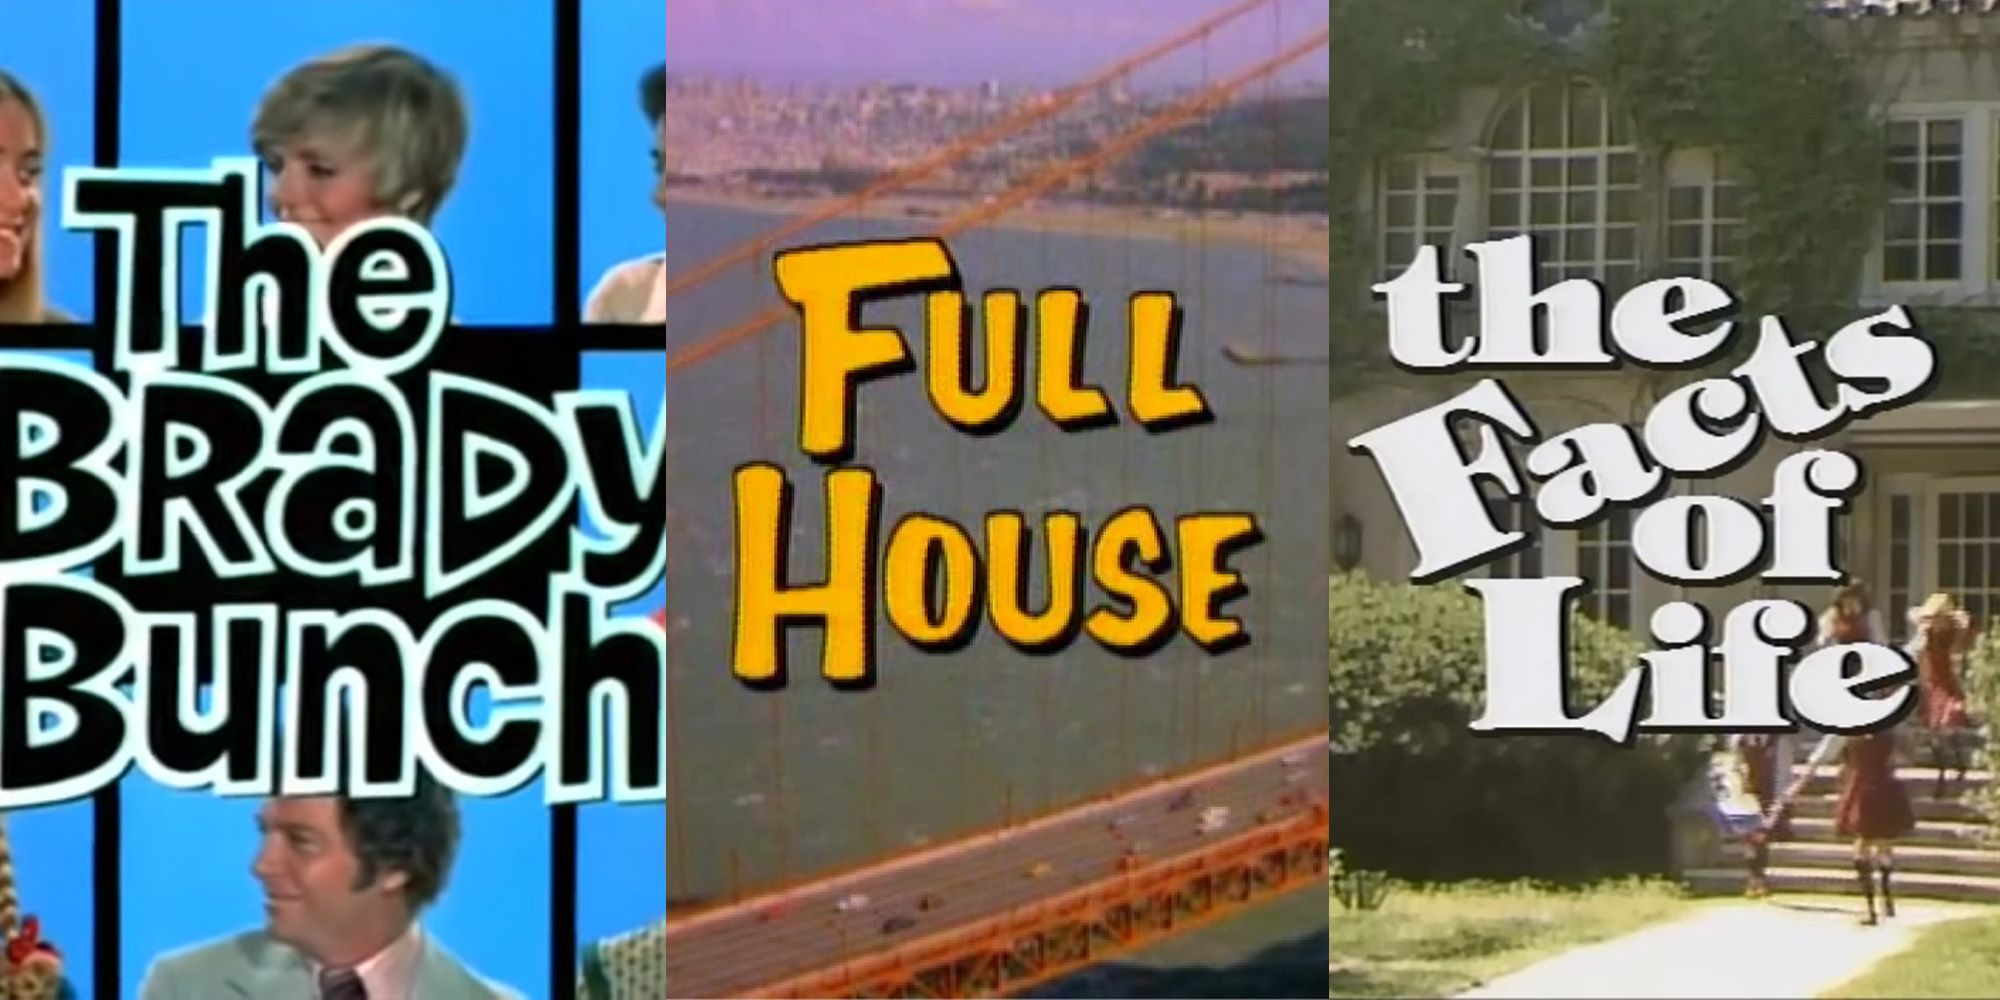 Do you know the lyrics to the Full House theme song Everywhere You Look?  - Catchy Comedy